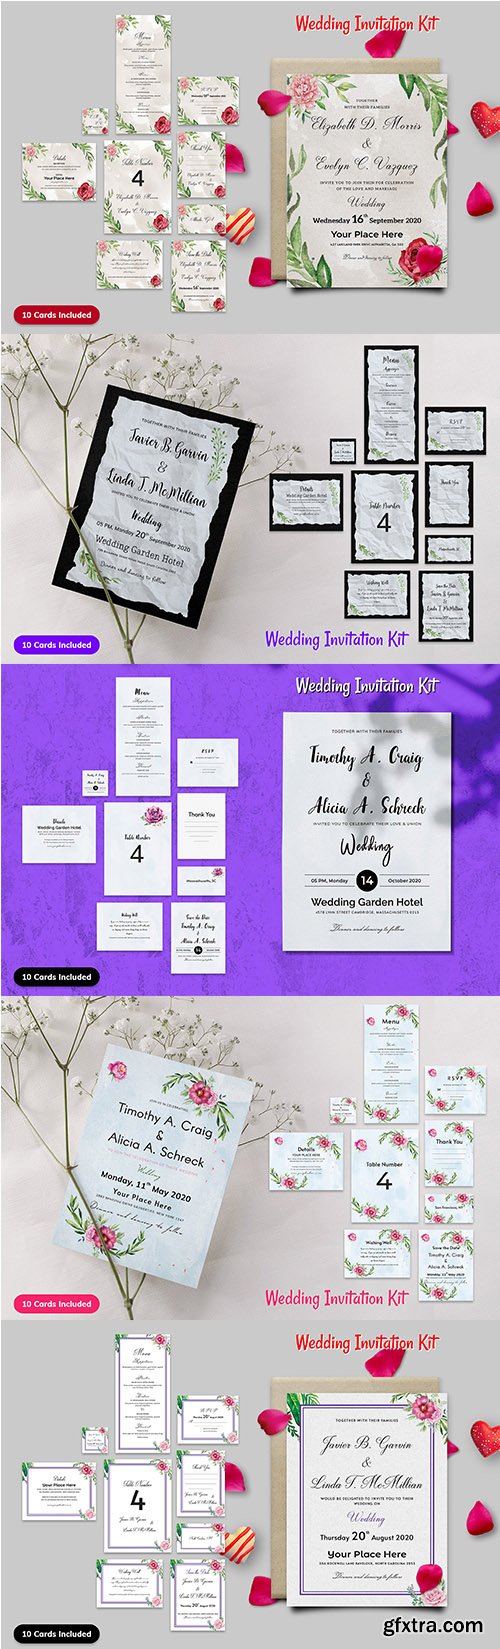 Modern Simple Wedding Invitation Kit with Watercolor Elements